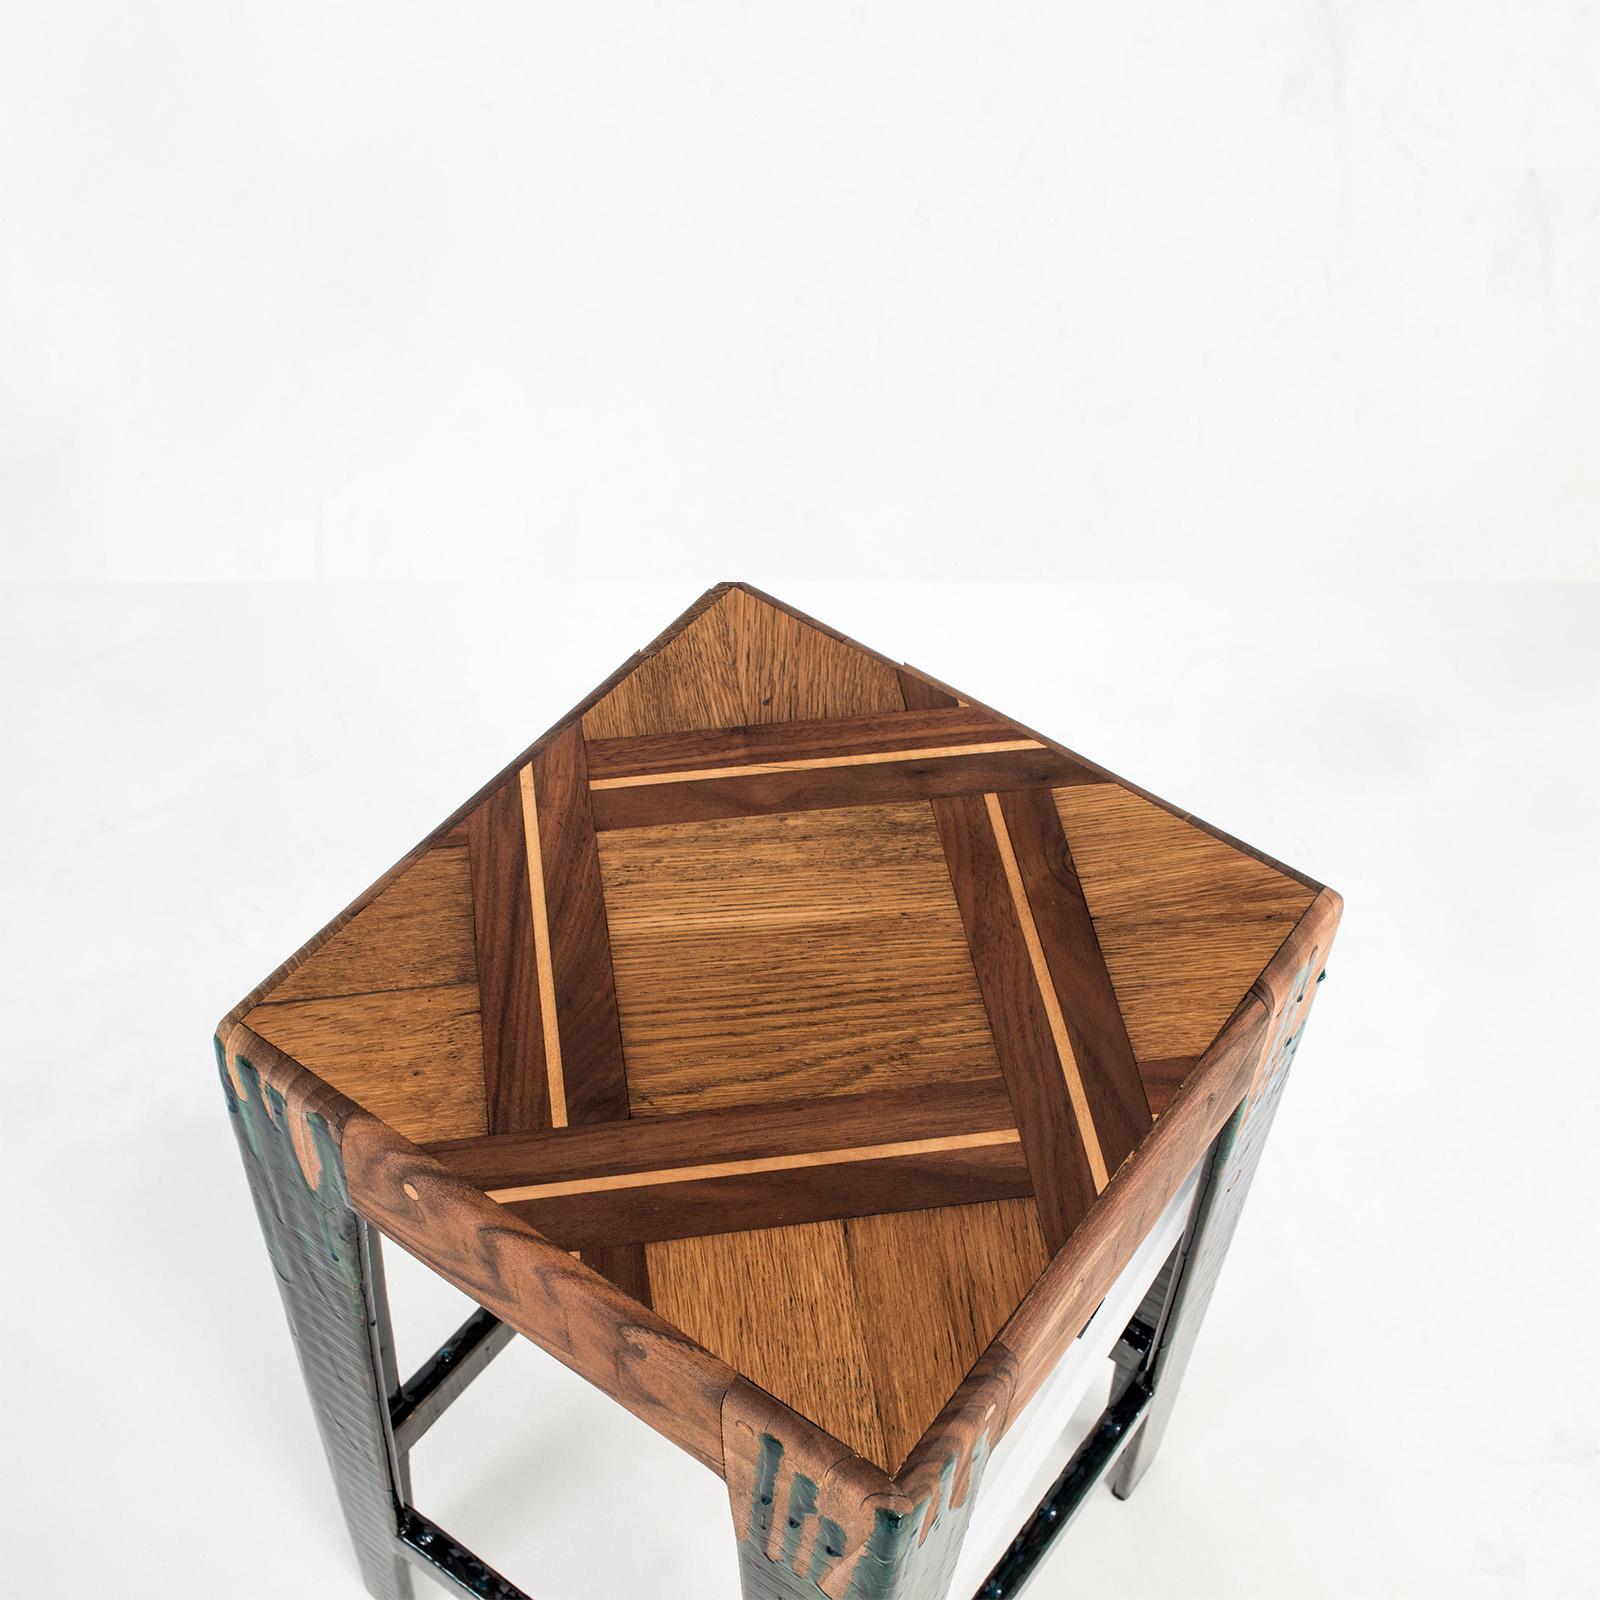 Italian 'Liquid' Wooden Stool in Walnut and Colored Resin by Hillsideout For Sale